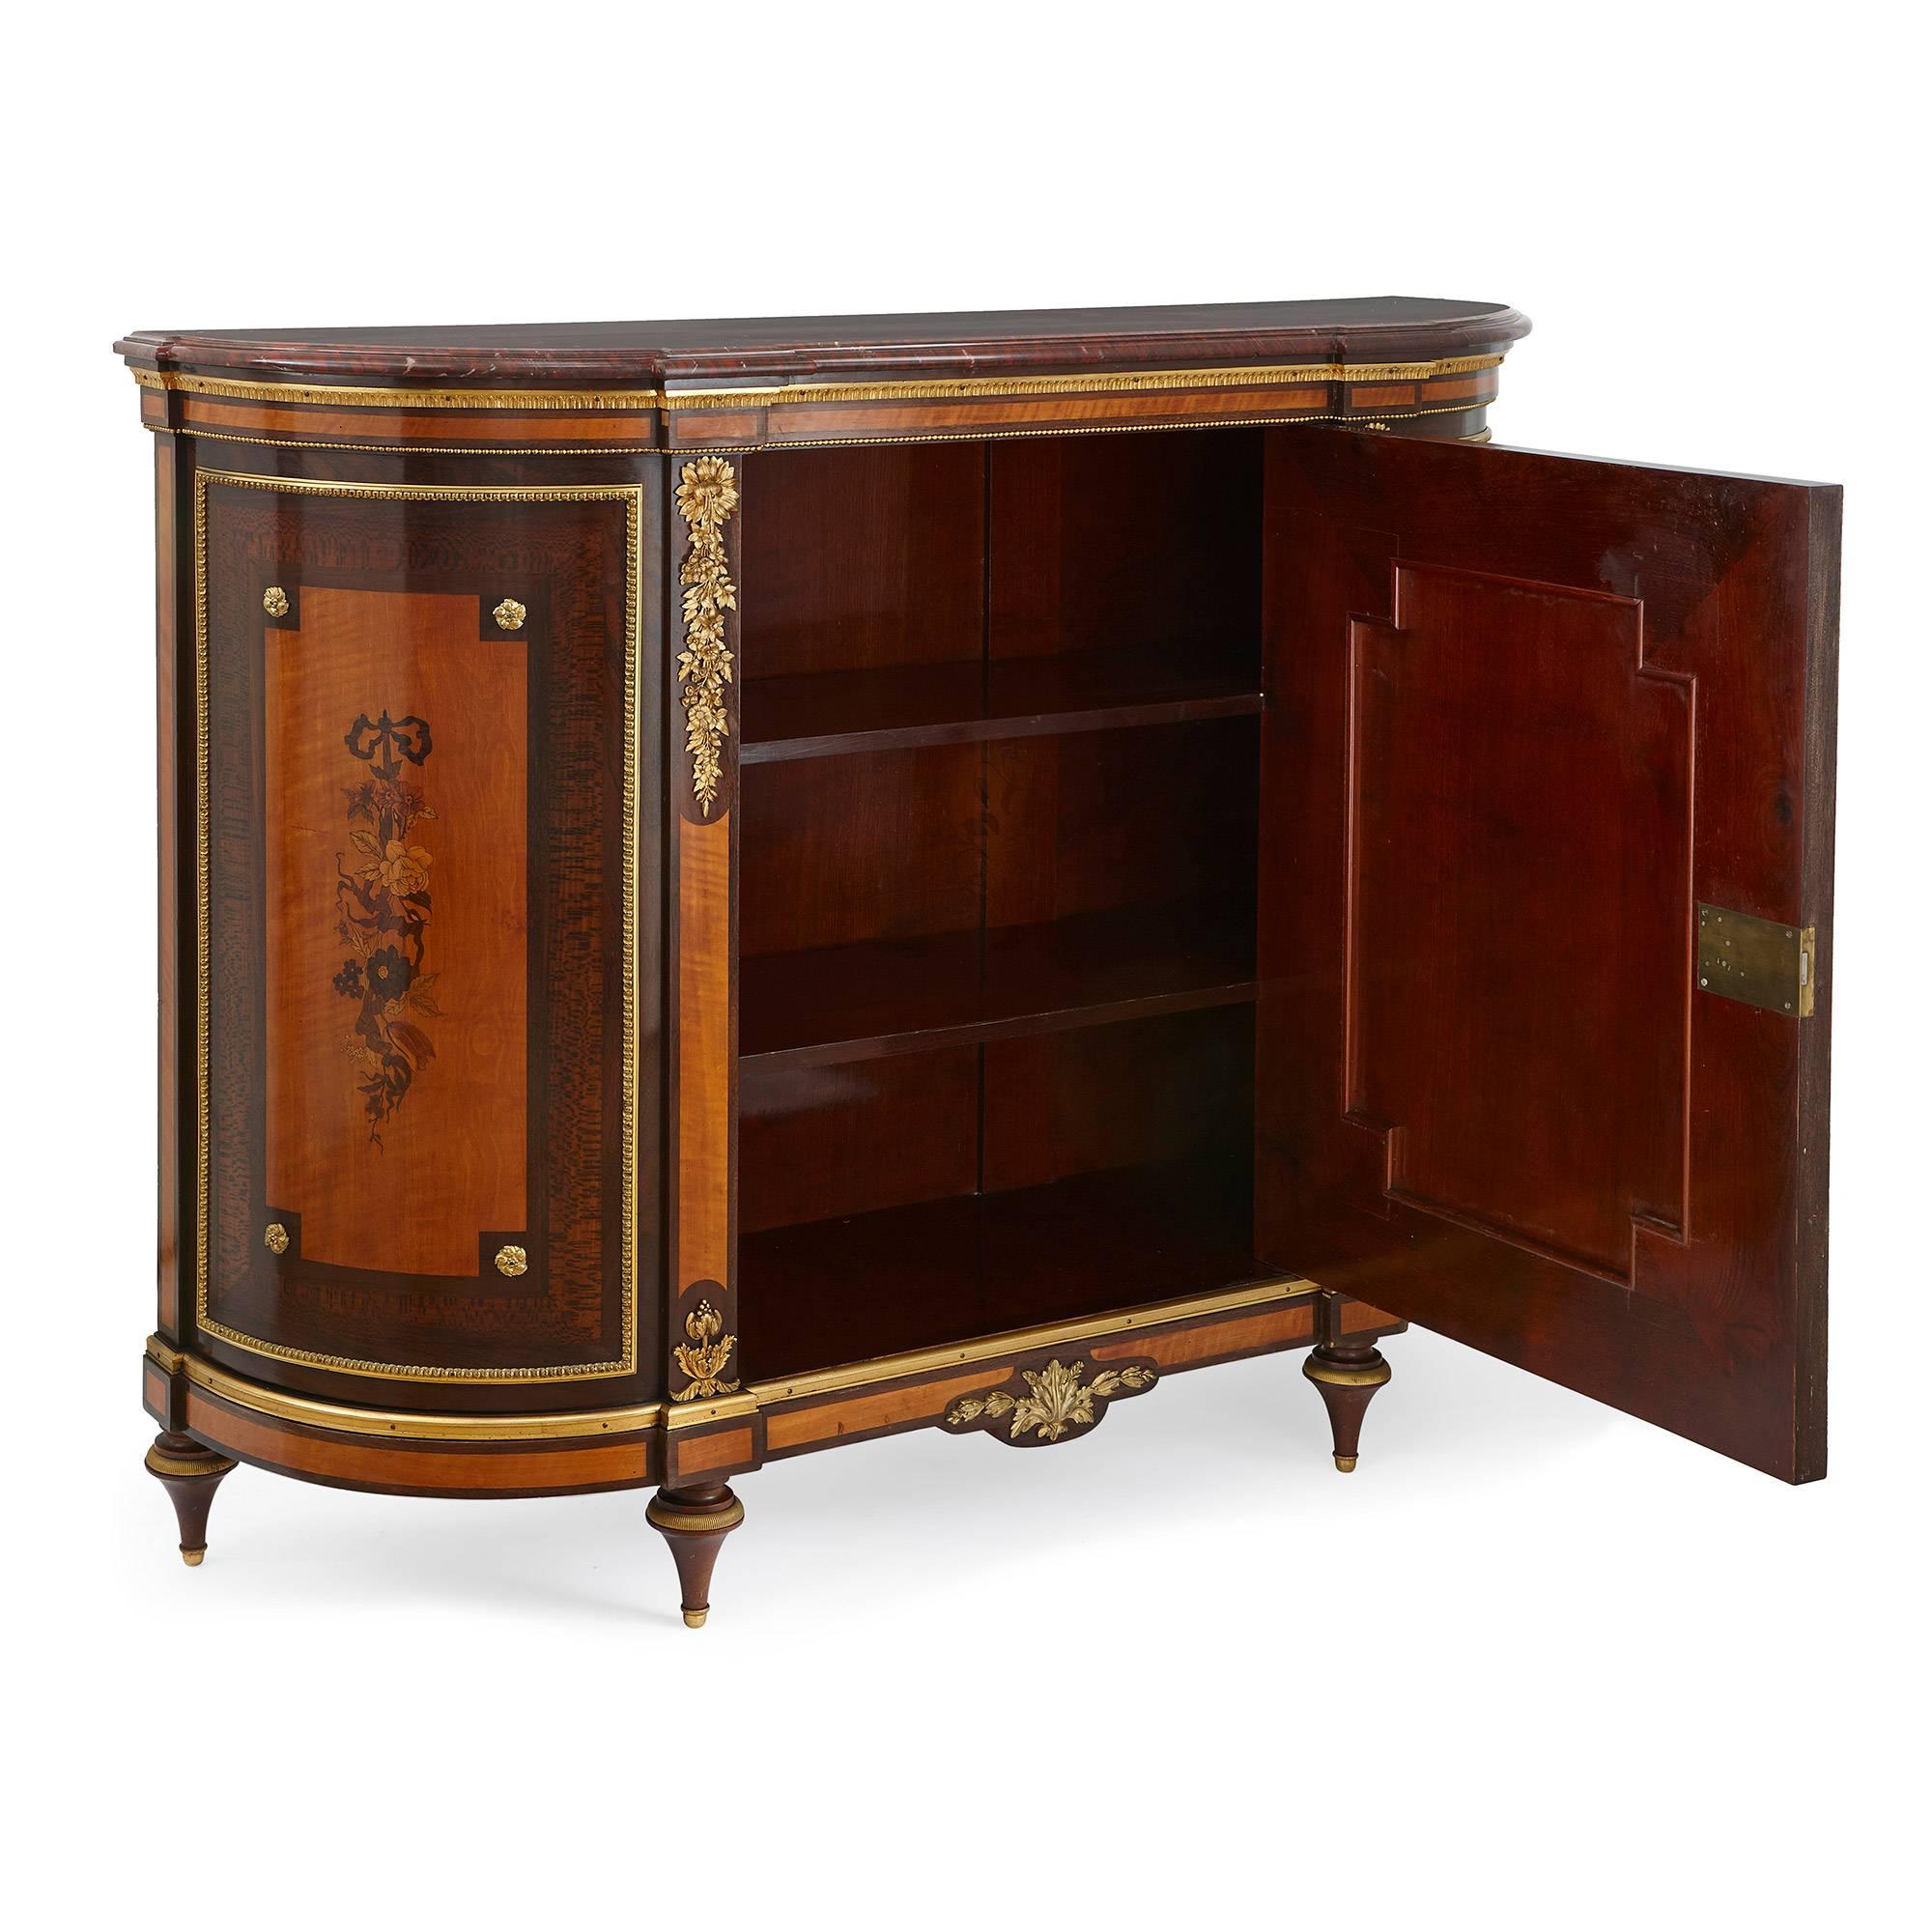 Napoleon III French Gilt Bronze, Marble and Marquetry Cabinet by Gros